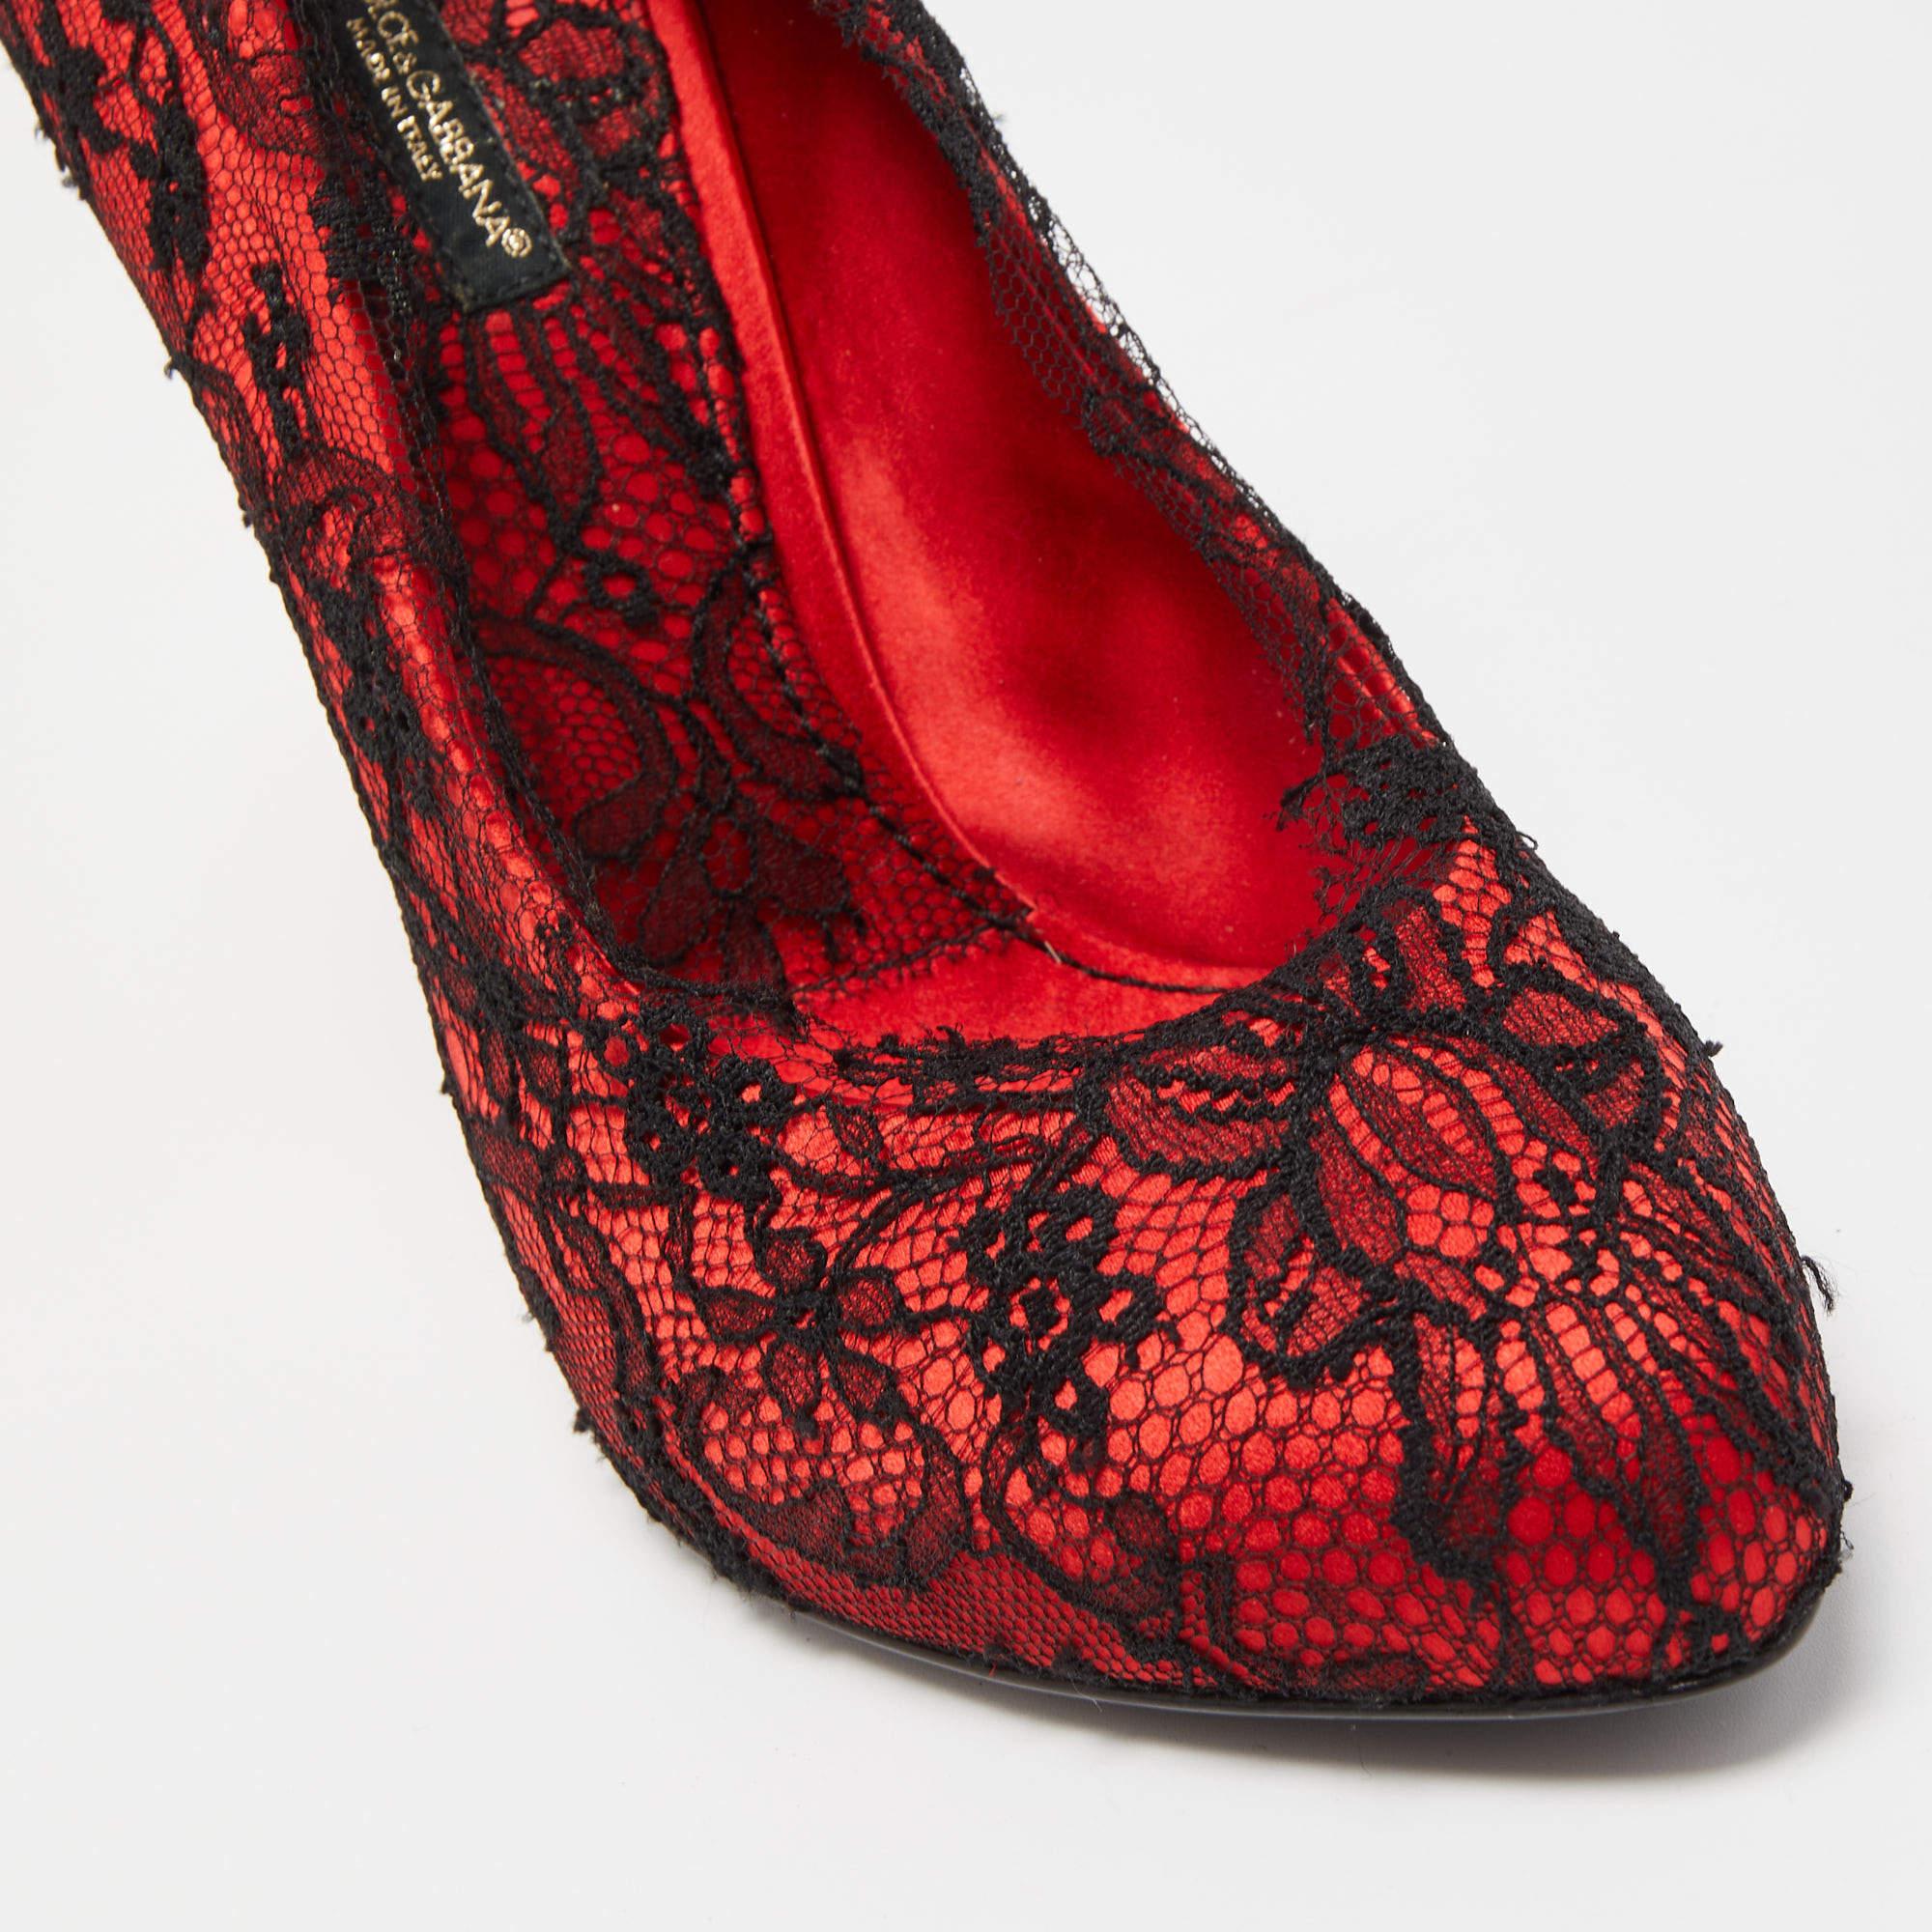 Dolce & Gabbana Red/Black Satin and Lace Pumps Size 38 For Sale 4